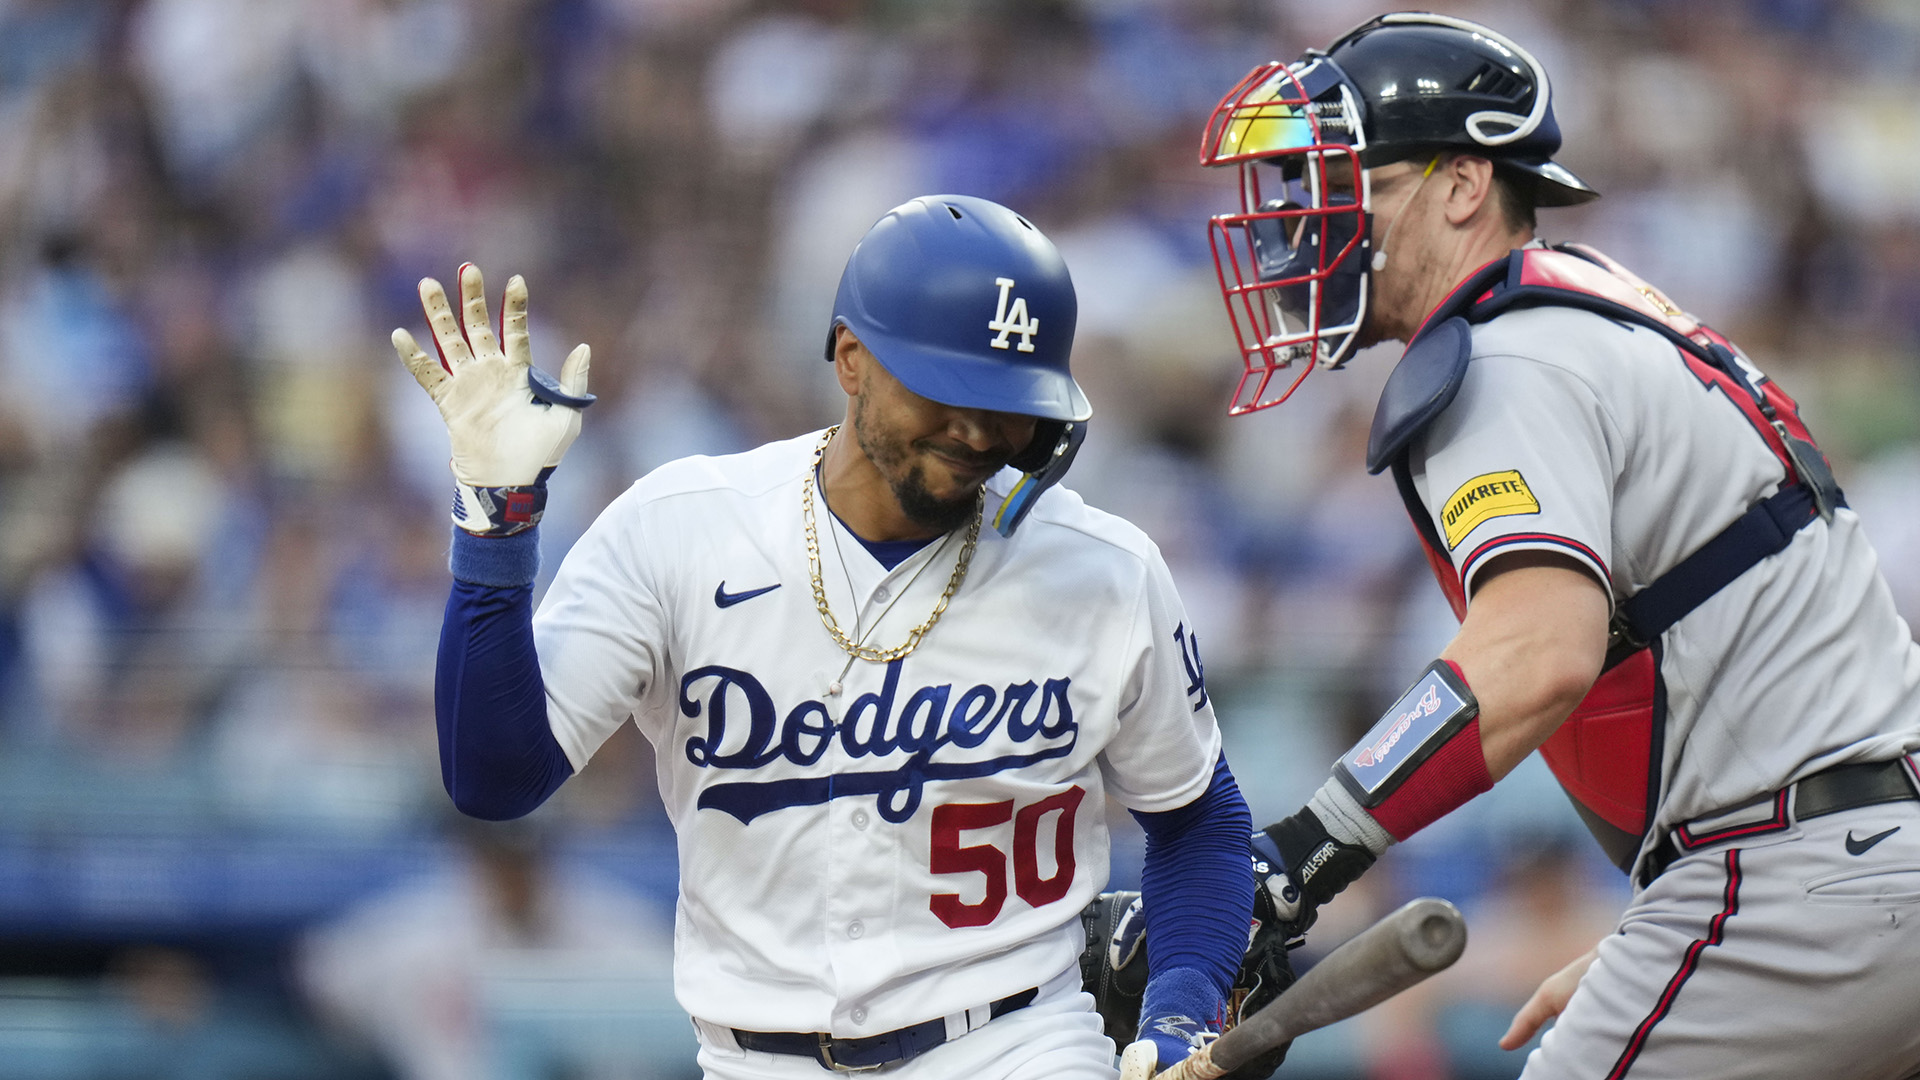 Dodgers fall to Braves 6-3